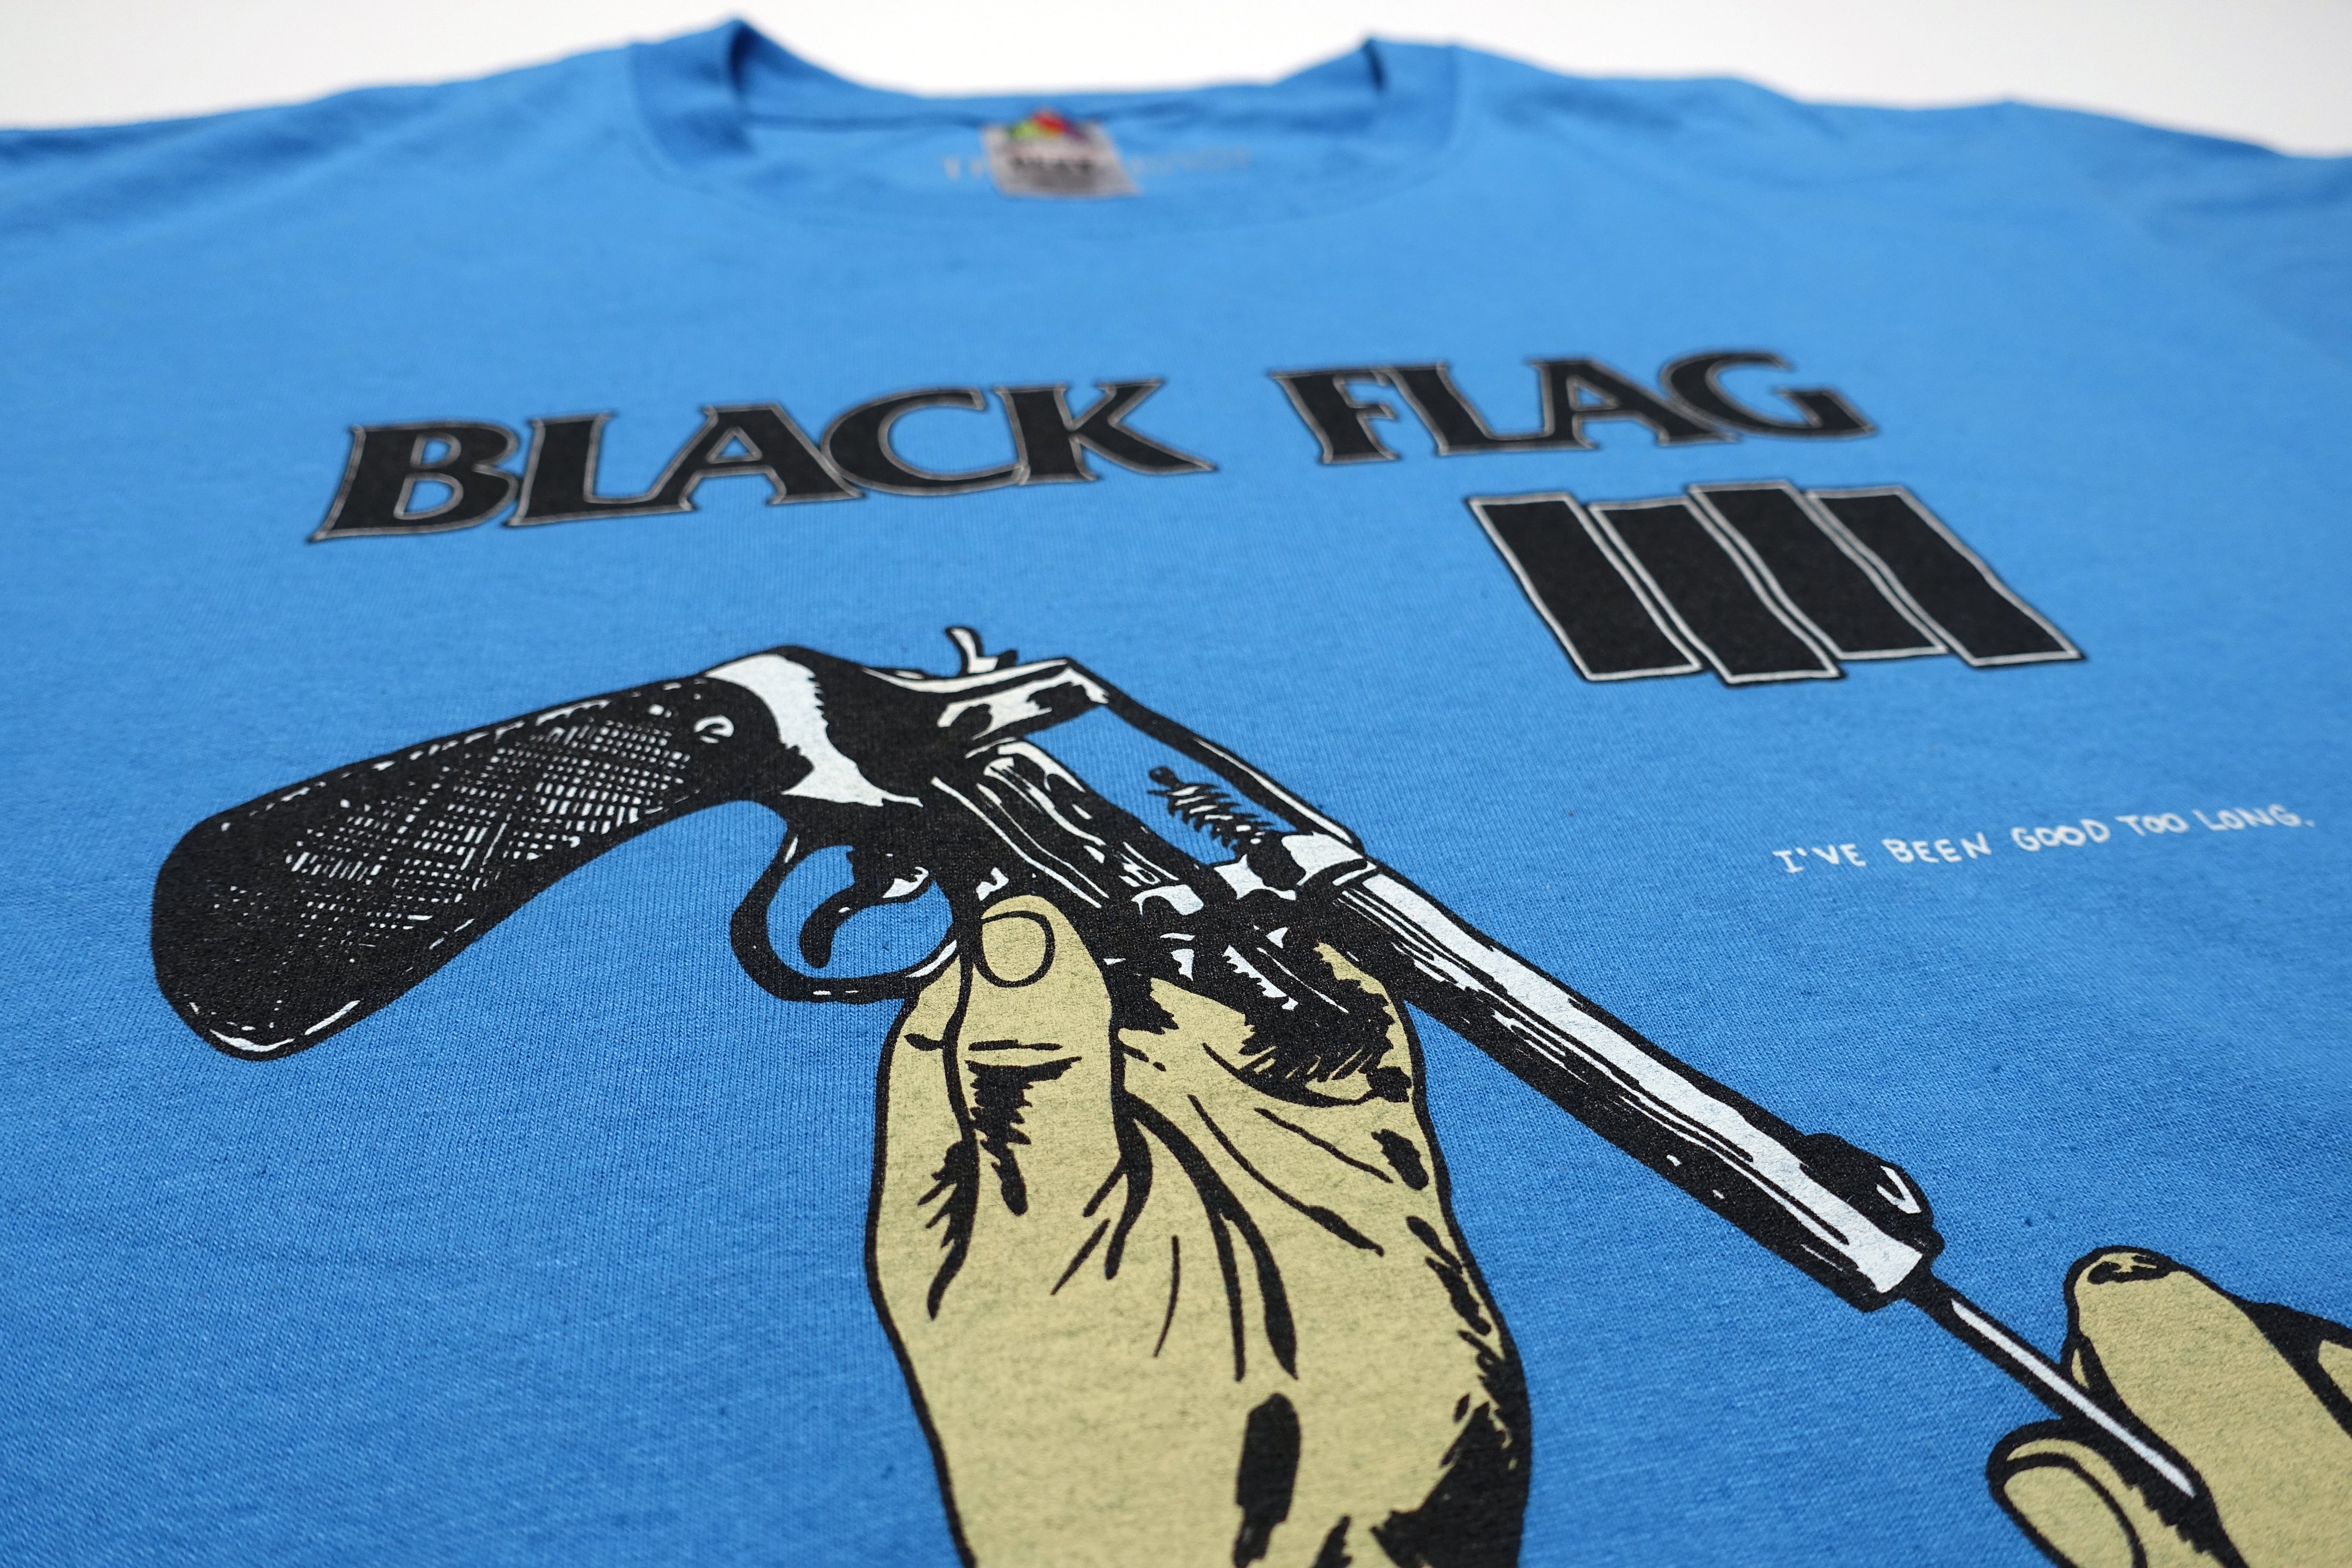 Black Flag - I've Been Good Too Long / In My Head 1986 Tour Shirt (Bootleg By Me) Size Large